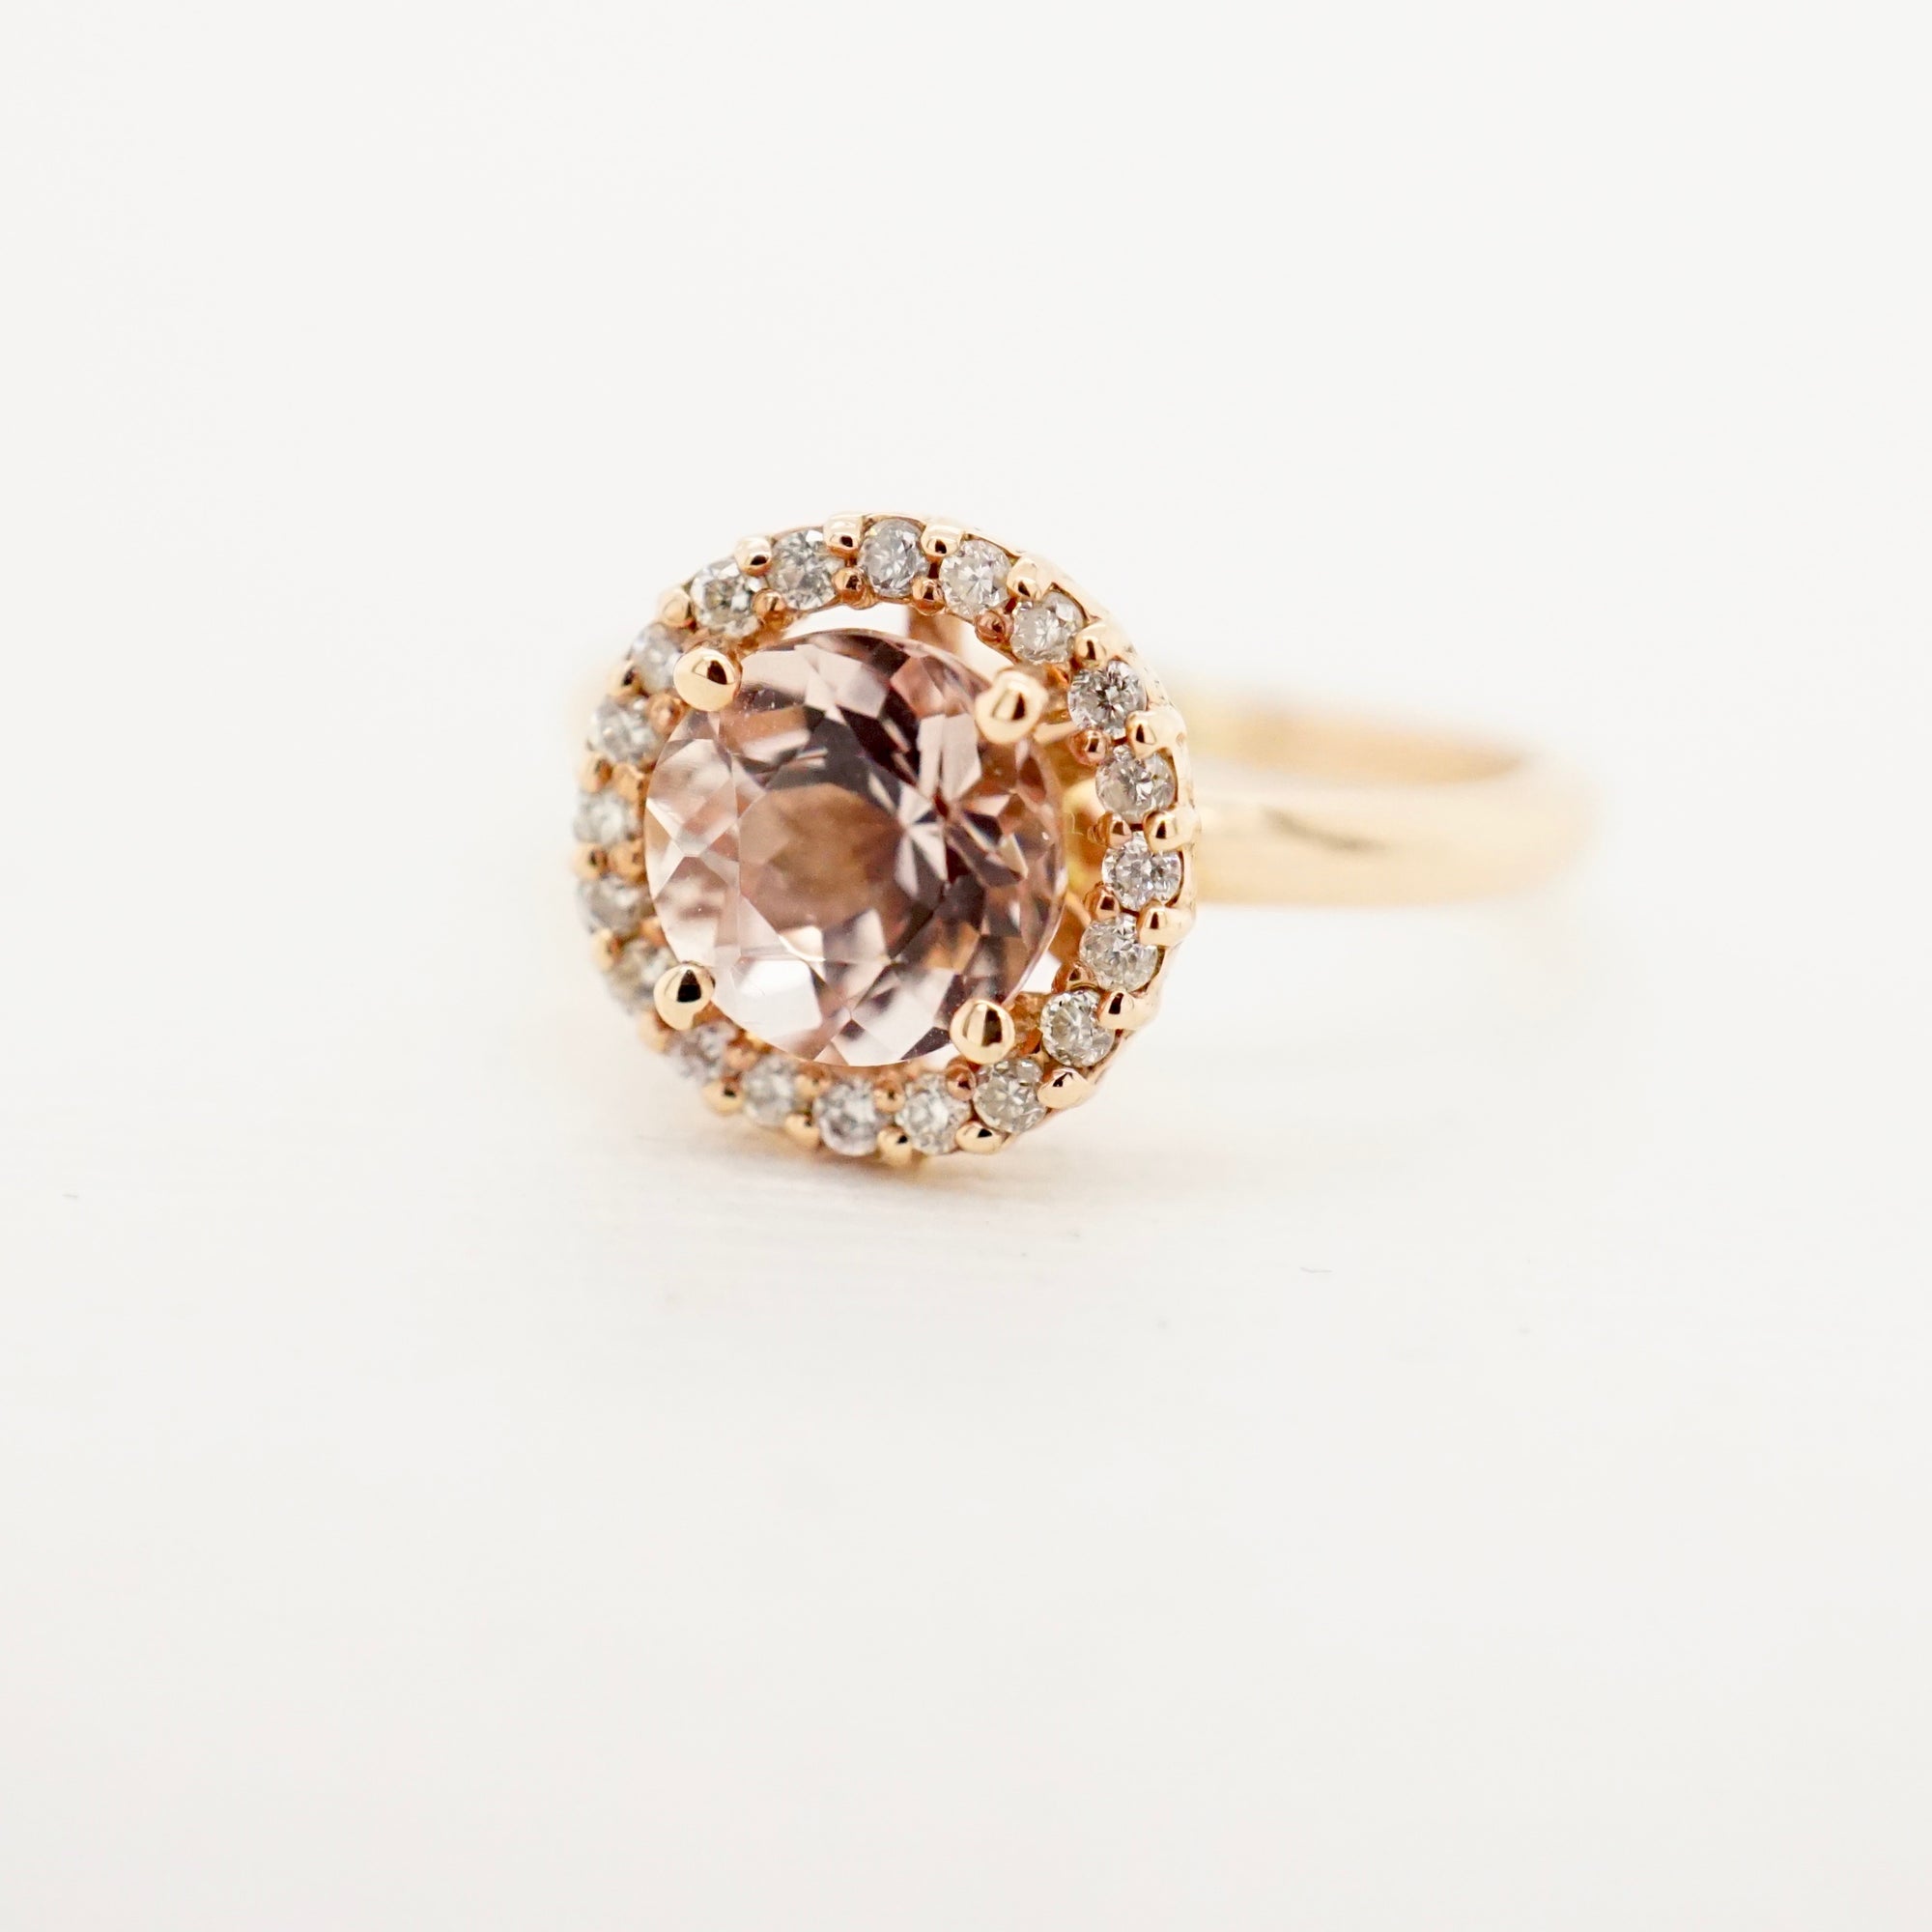 Haydee Oval Halo with Pink Morganite Engagement Ring in Gold 8x6 Natural Pink Morganite / 14kt White Gold / Sizes 4-9 Message US Your Finger Size